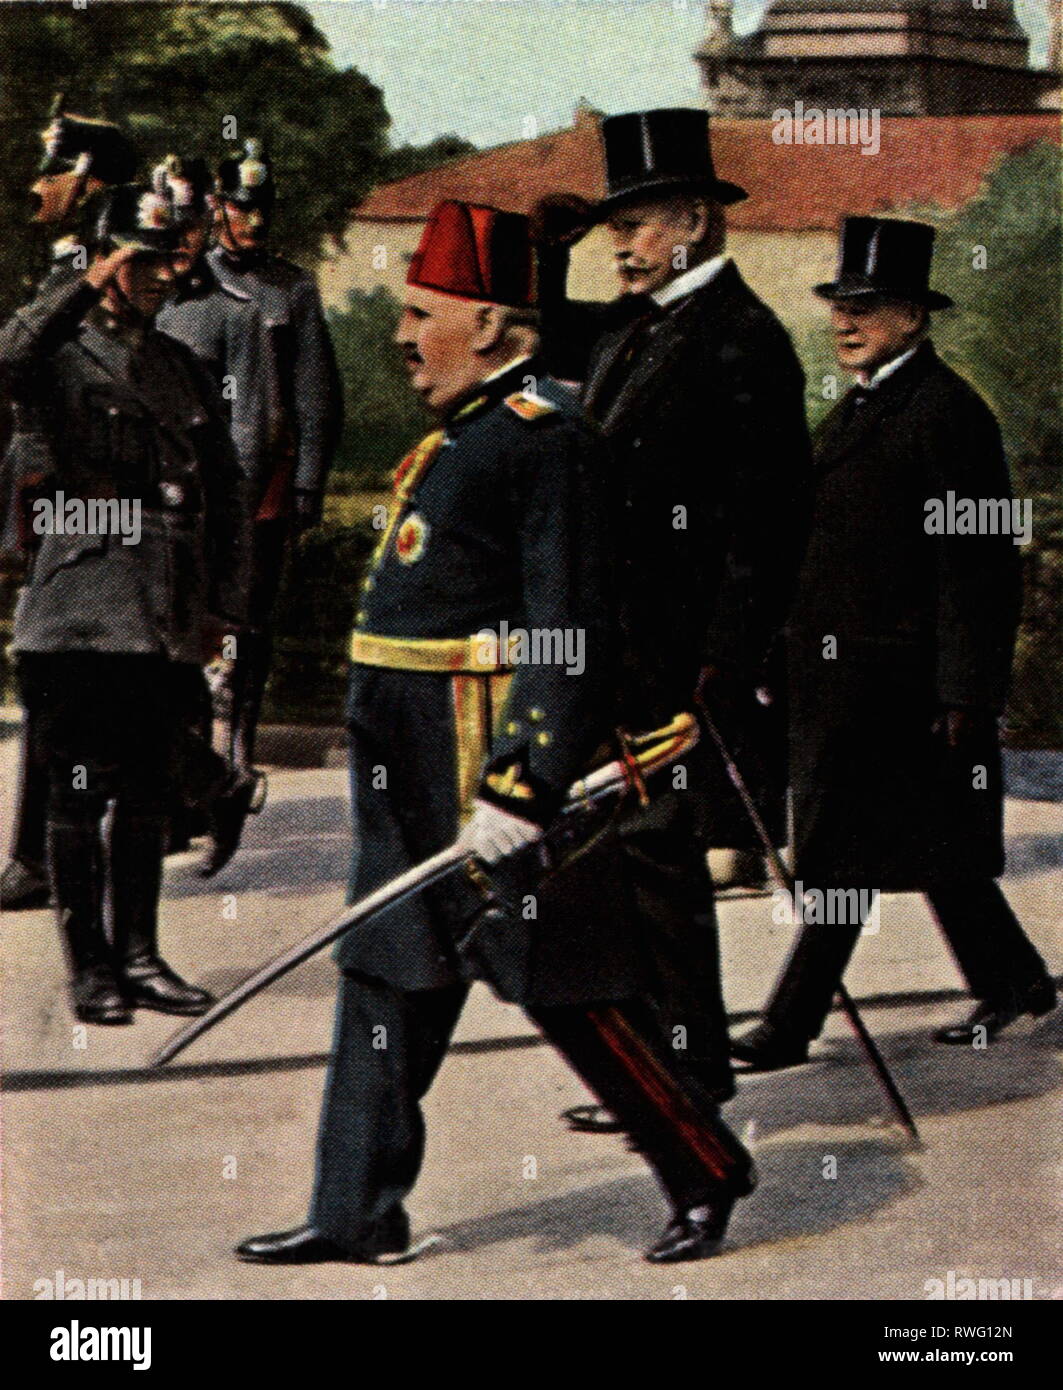 Fuad I, 26.3.1868 - 28.4.1936, King of Egypt 15.3.1922 - 28.4.1936, full length, visit to Germany, with President of the Reich Paul von Hindenburg, Berlin, 6.6.1929, coloured photograph, cigarette card, series 'Die Nachkriegszeit', 1935, Additional-Rights-Clearance-Info-Not-Available Stock Photo